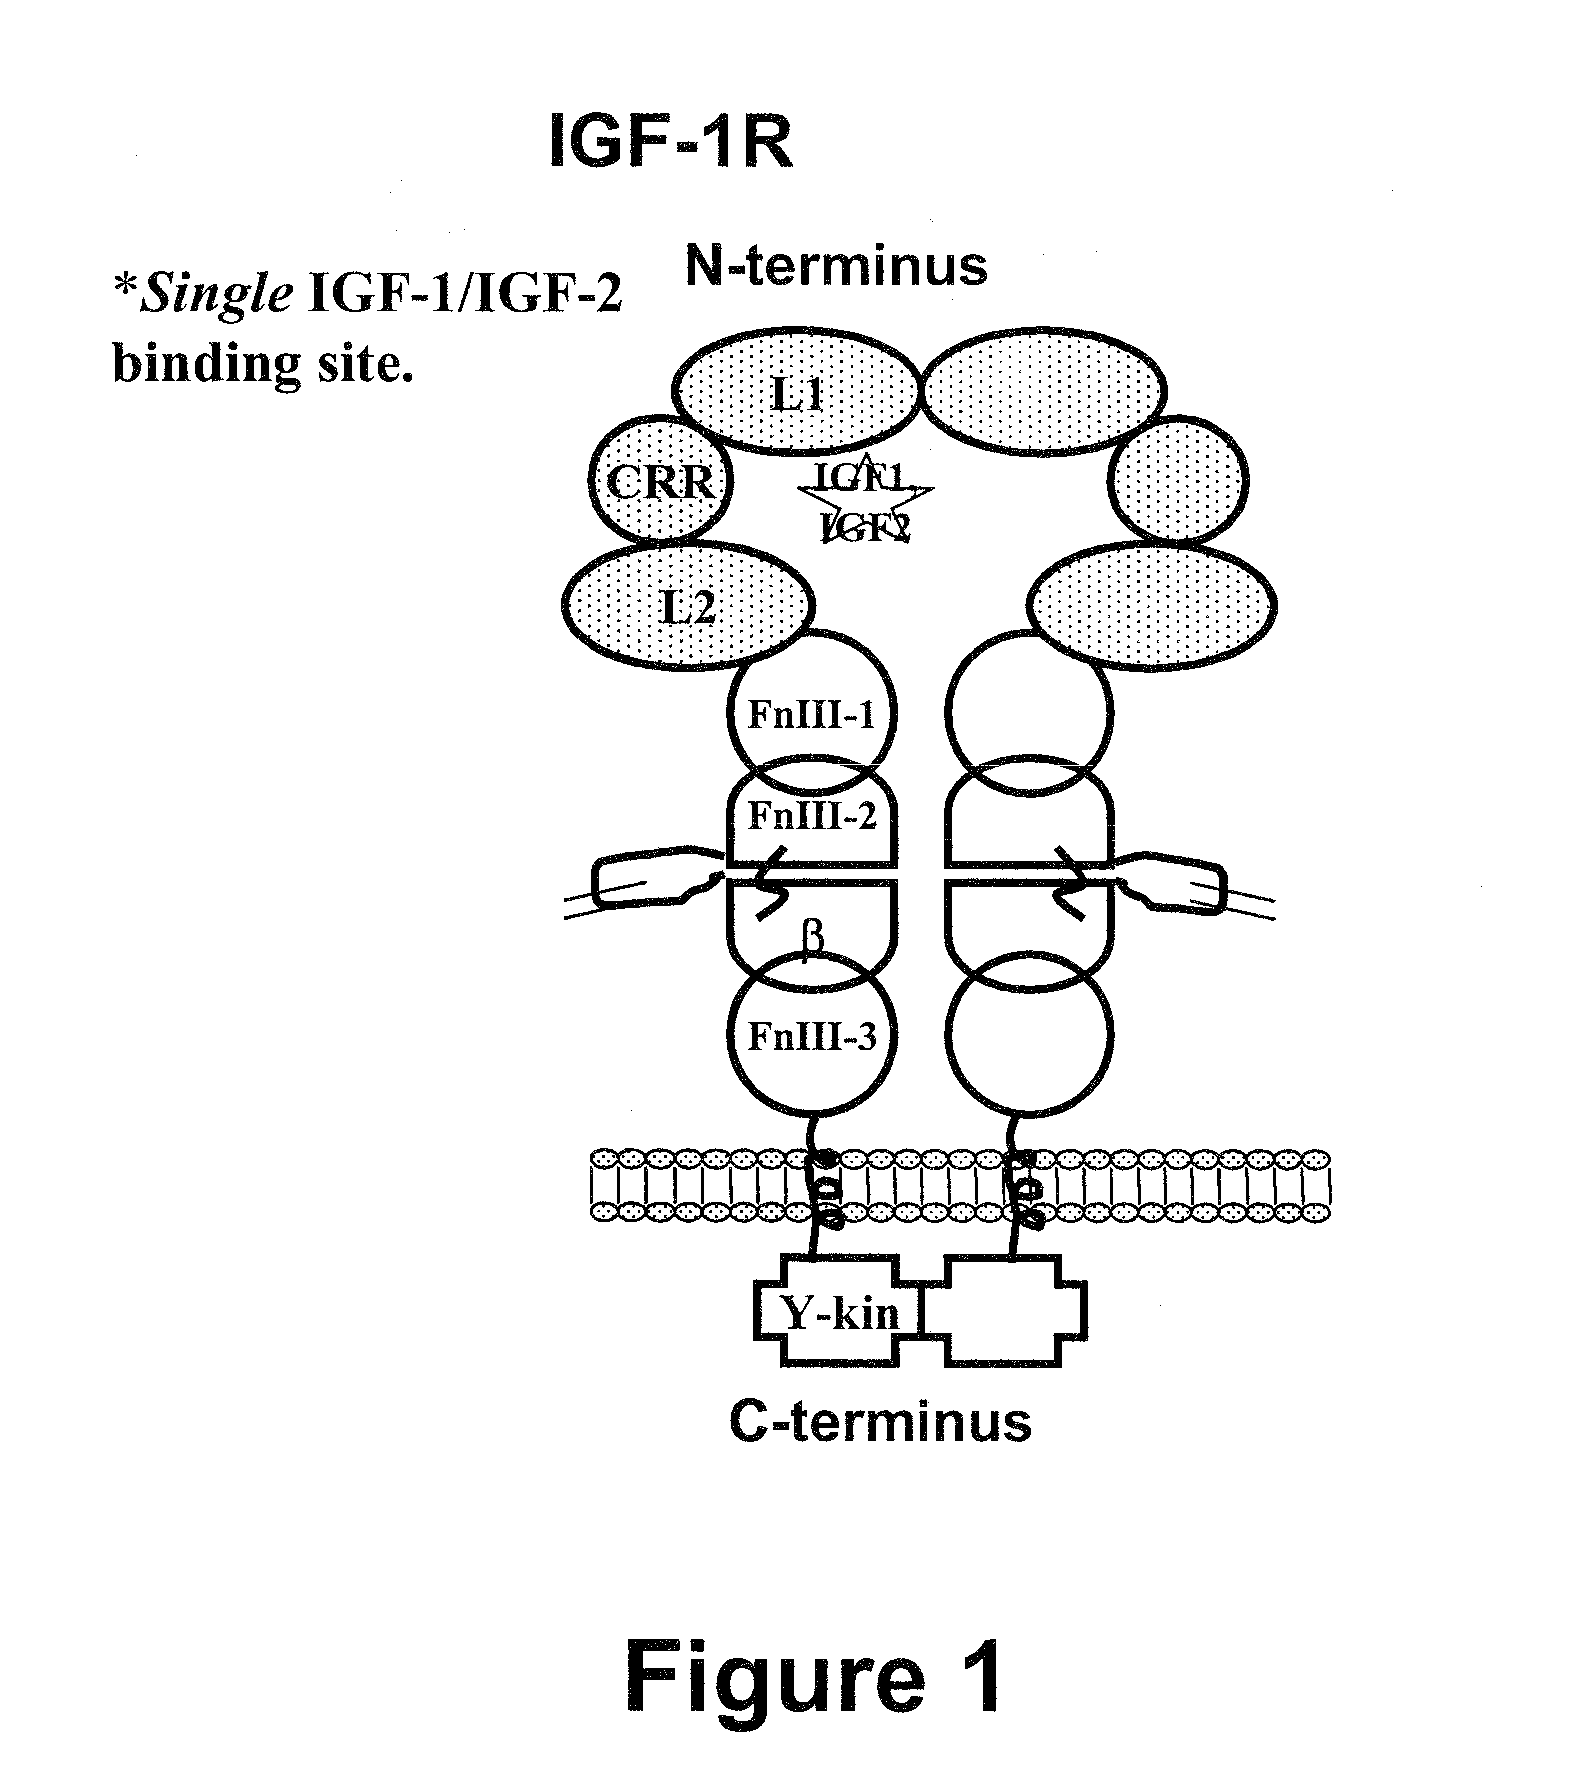 Compositions that bind multiple epitopes of igf-1r